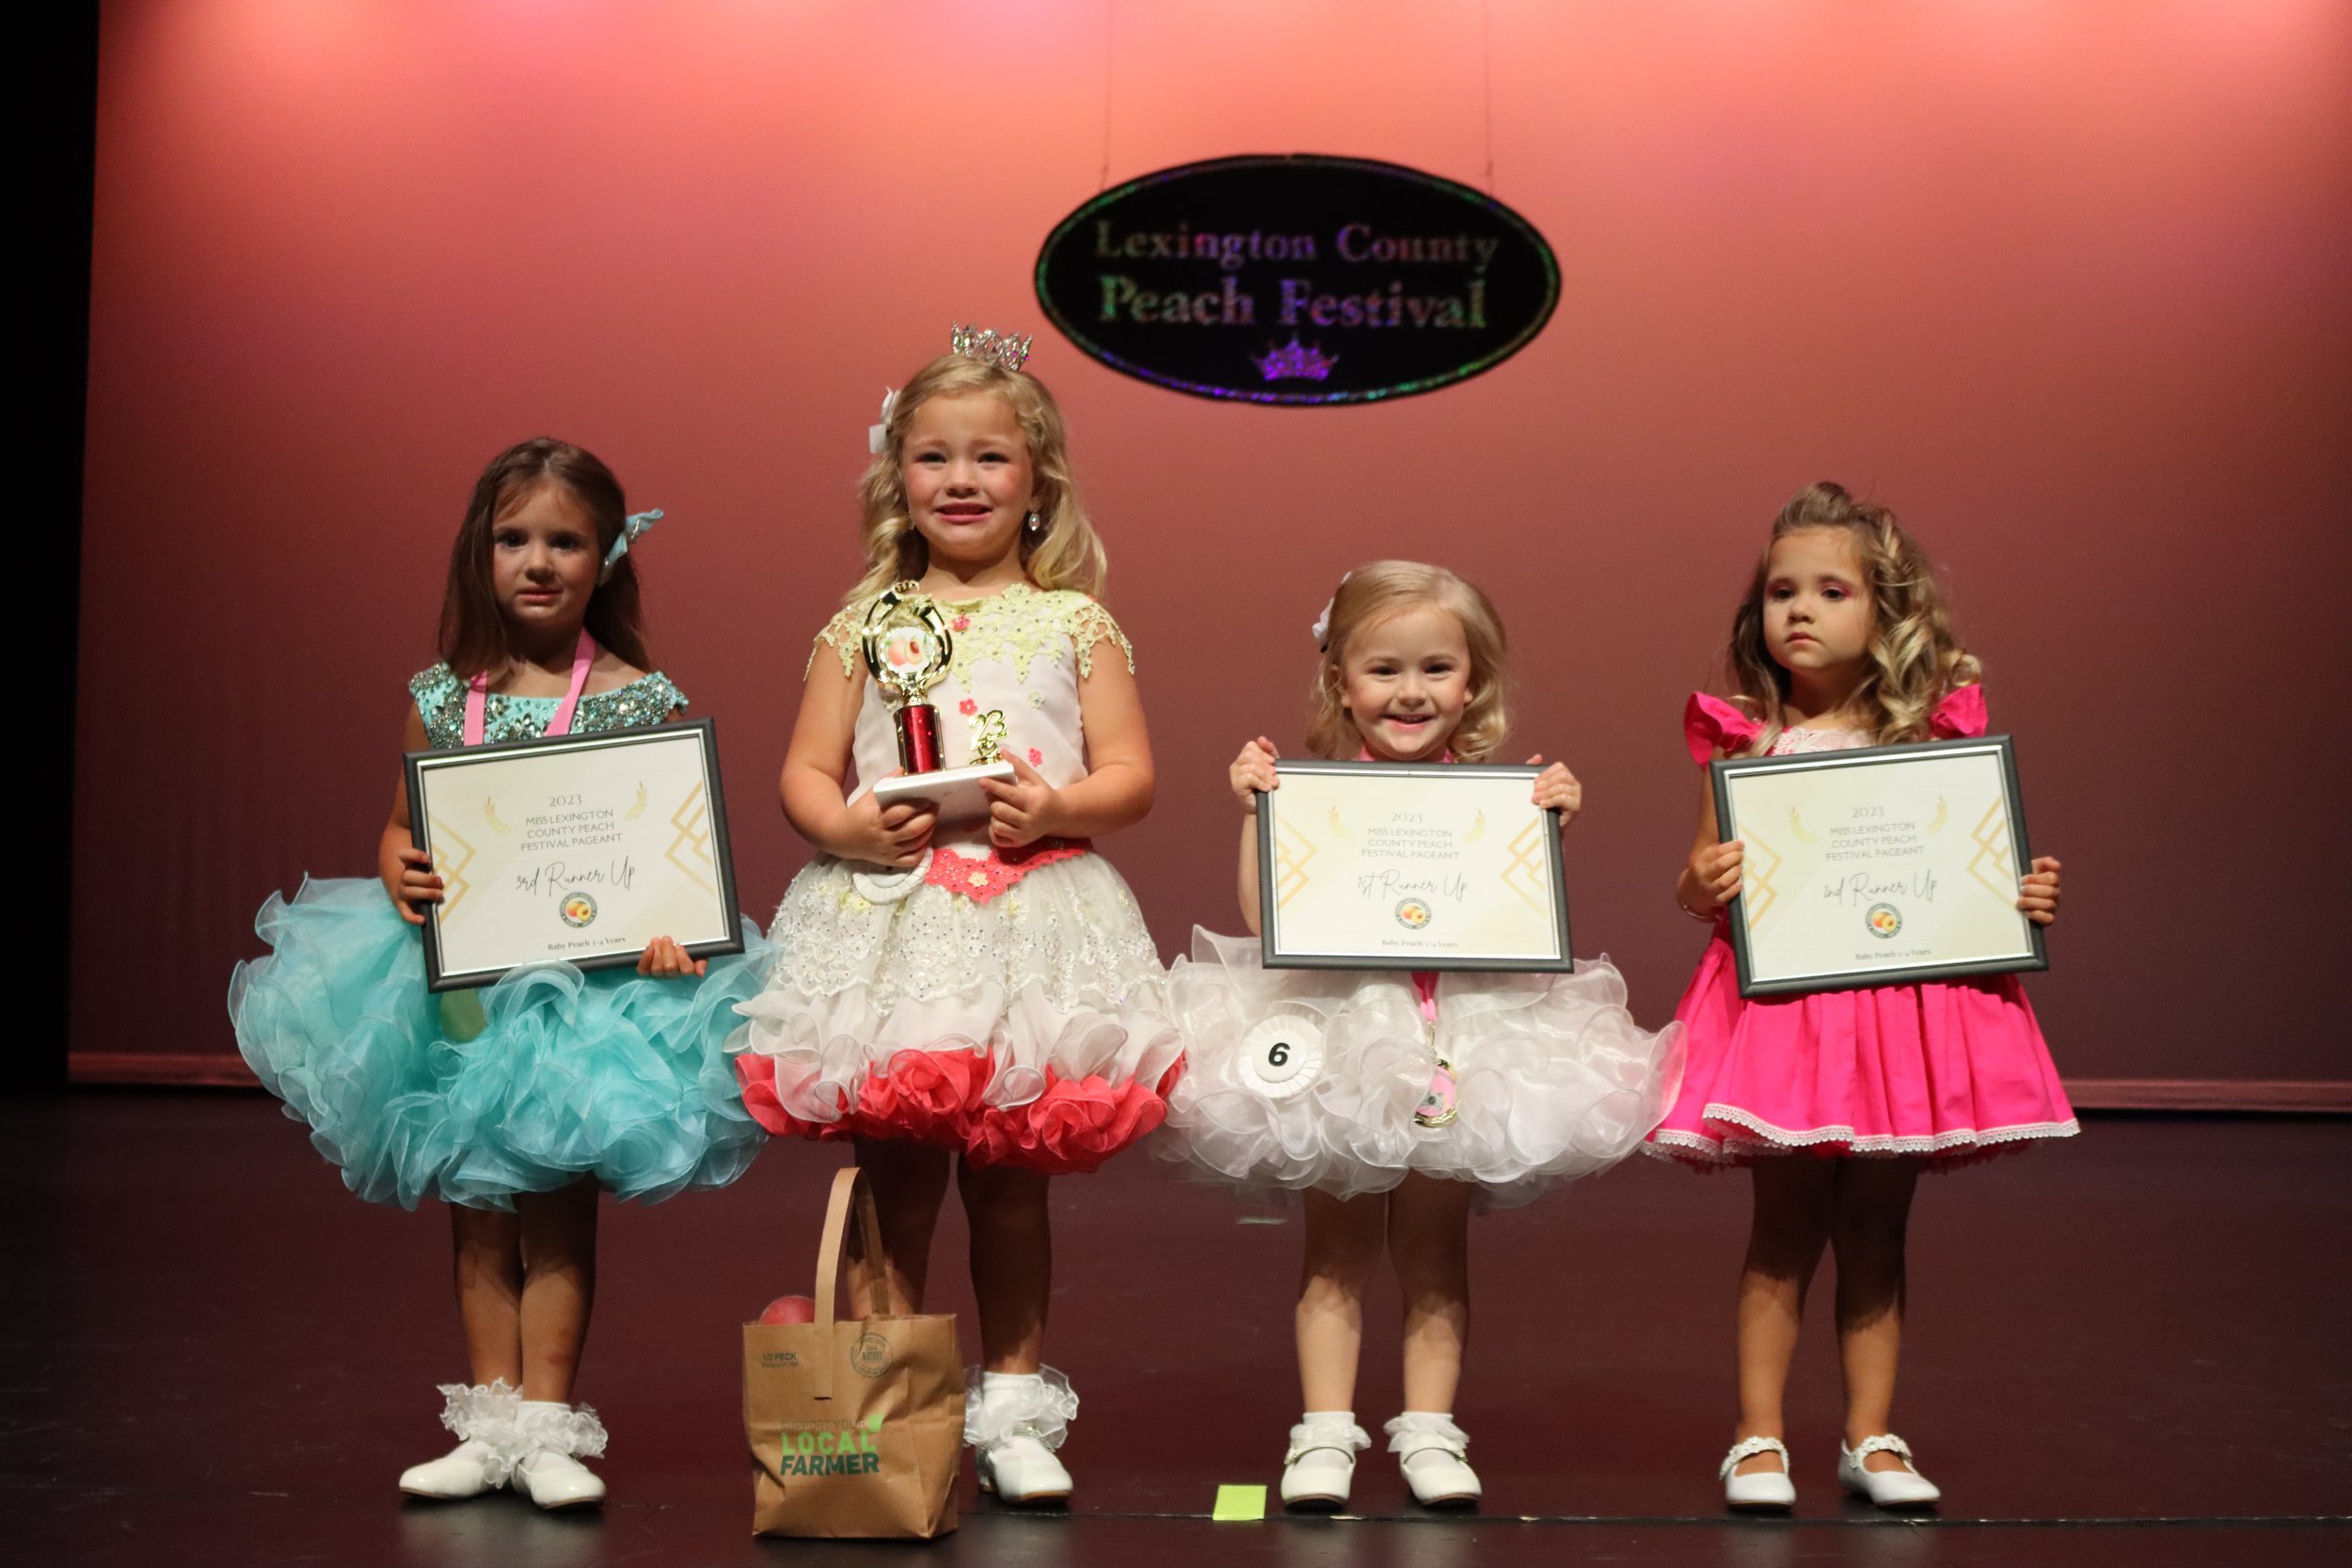 Baby Peach Division (3-4 Years)